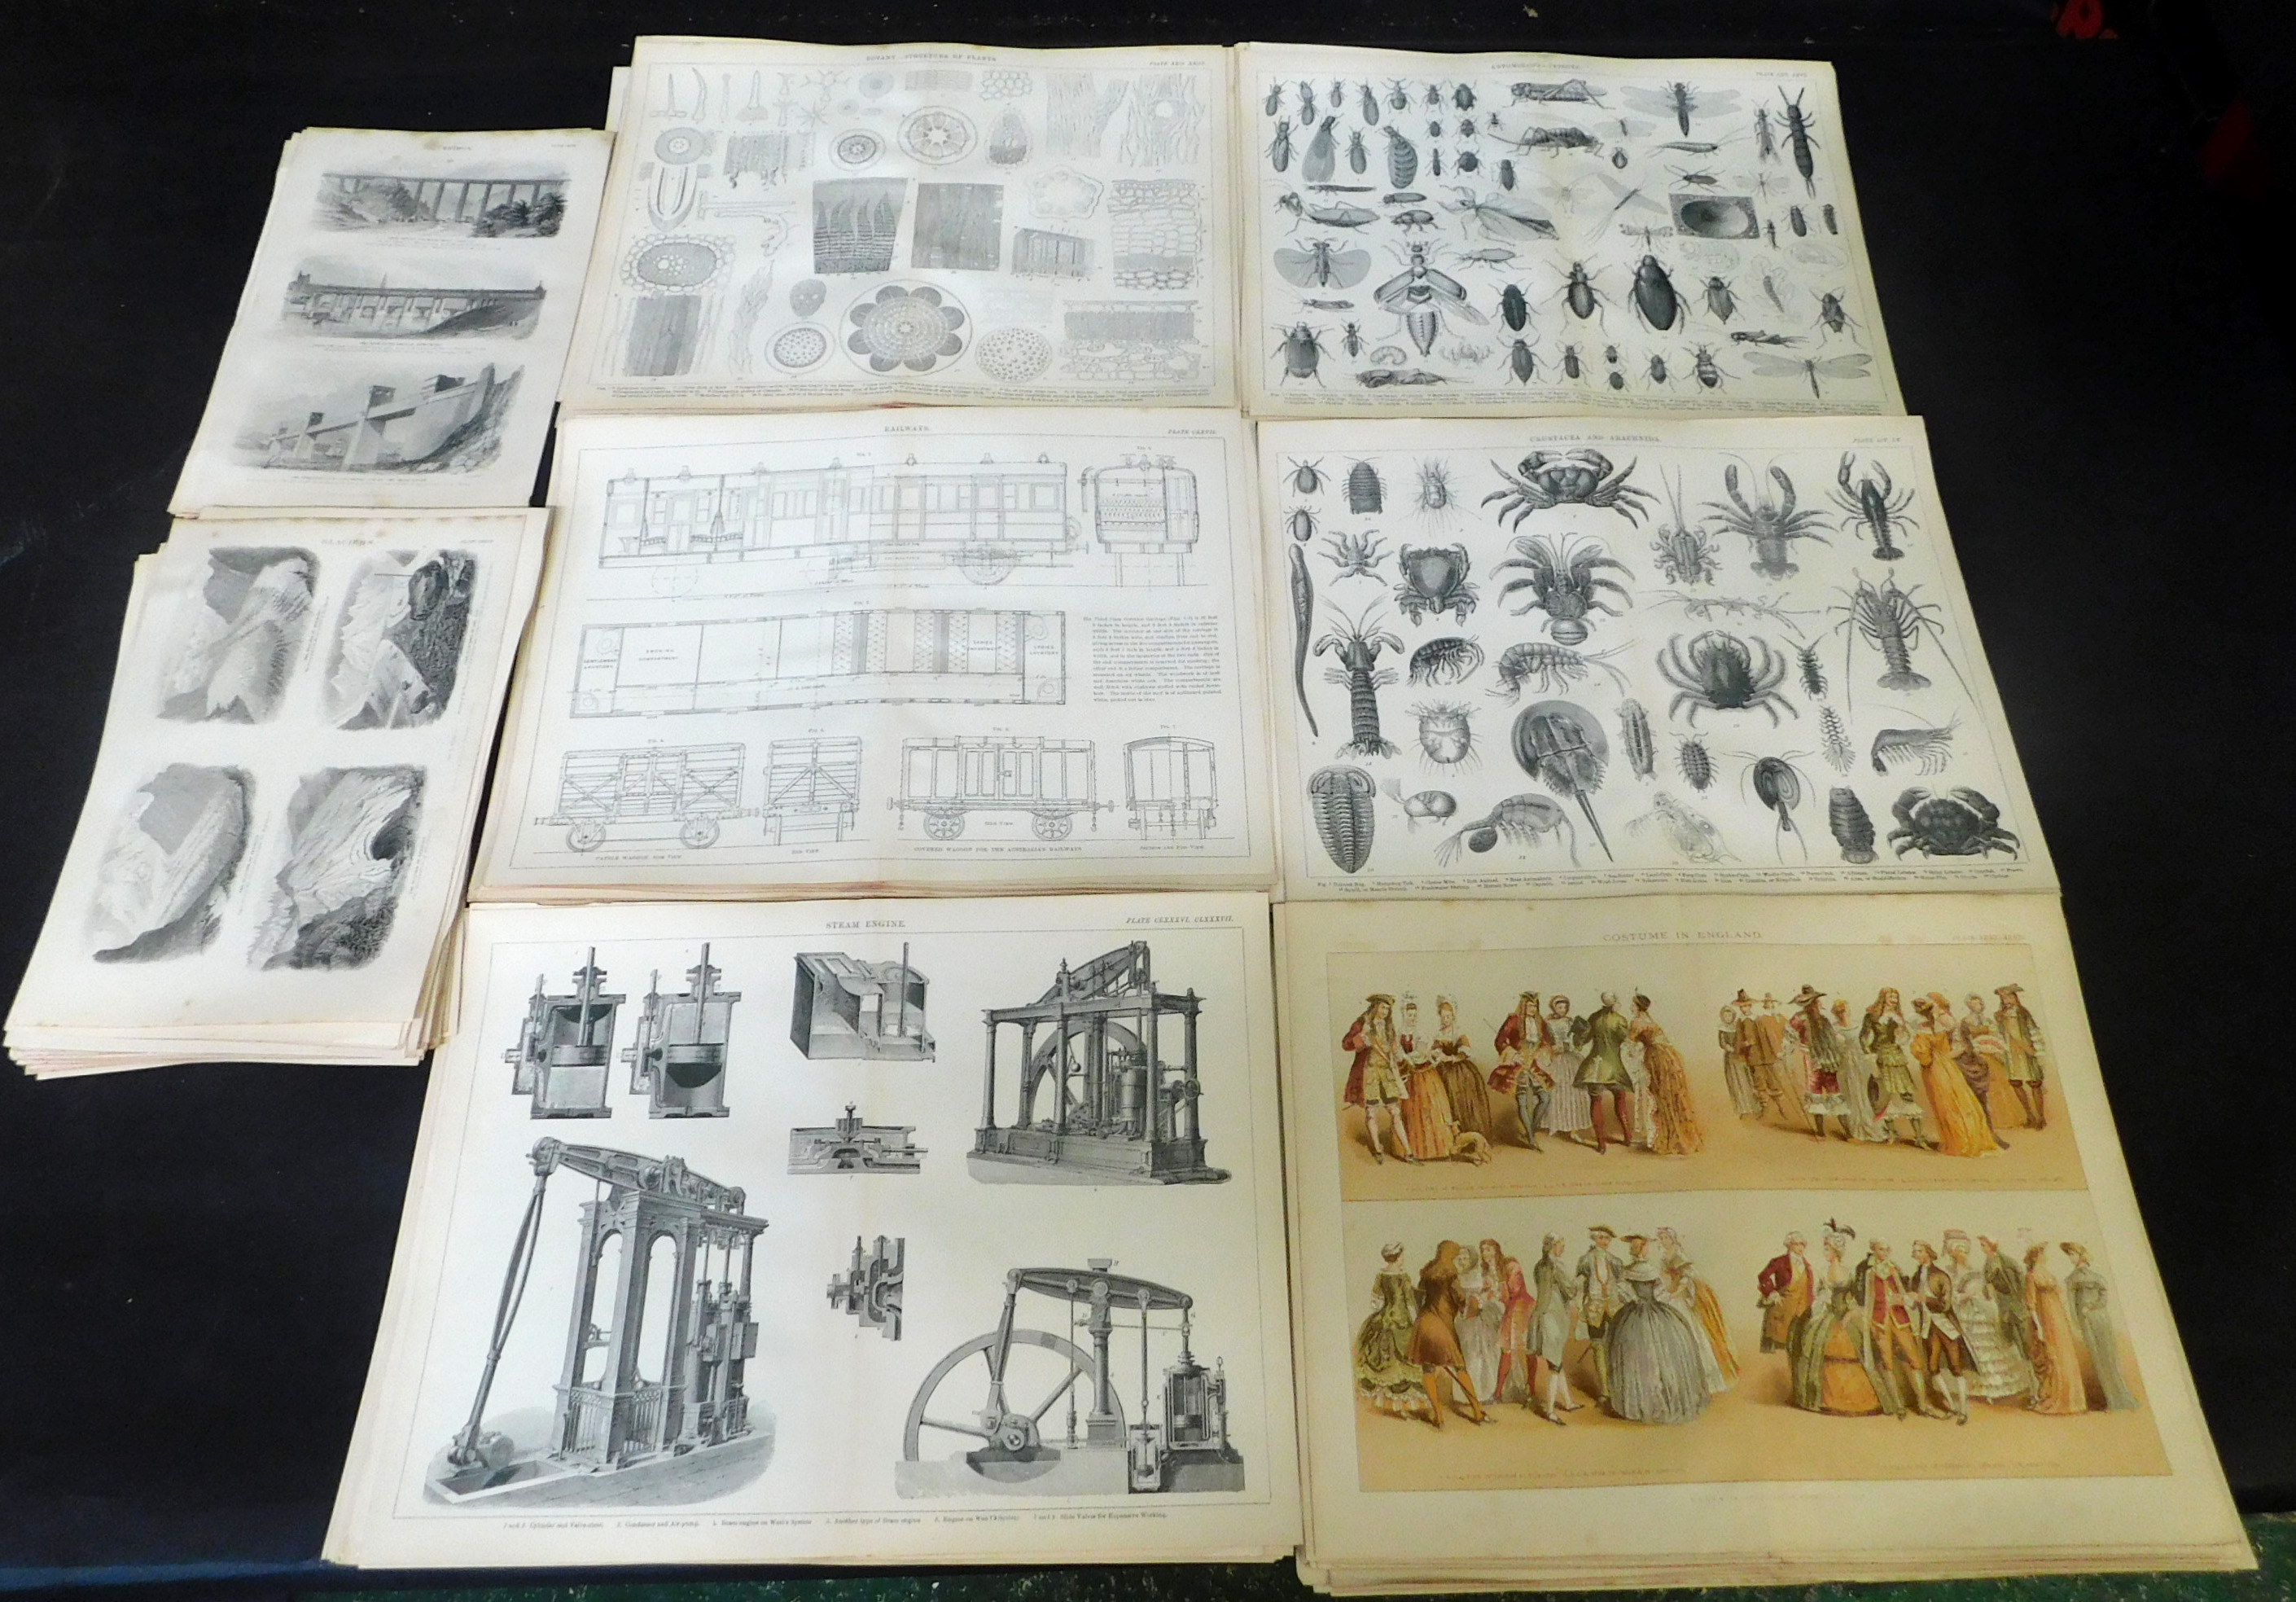 Approx 134 assorted engravings circa mid to late 19th century including botany - structure of